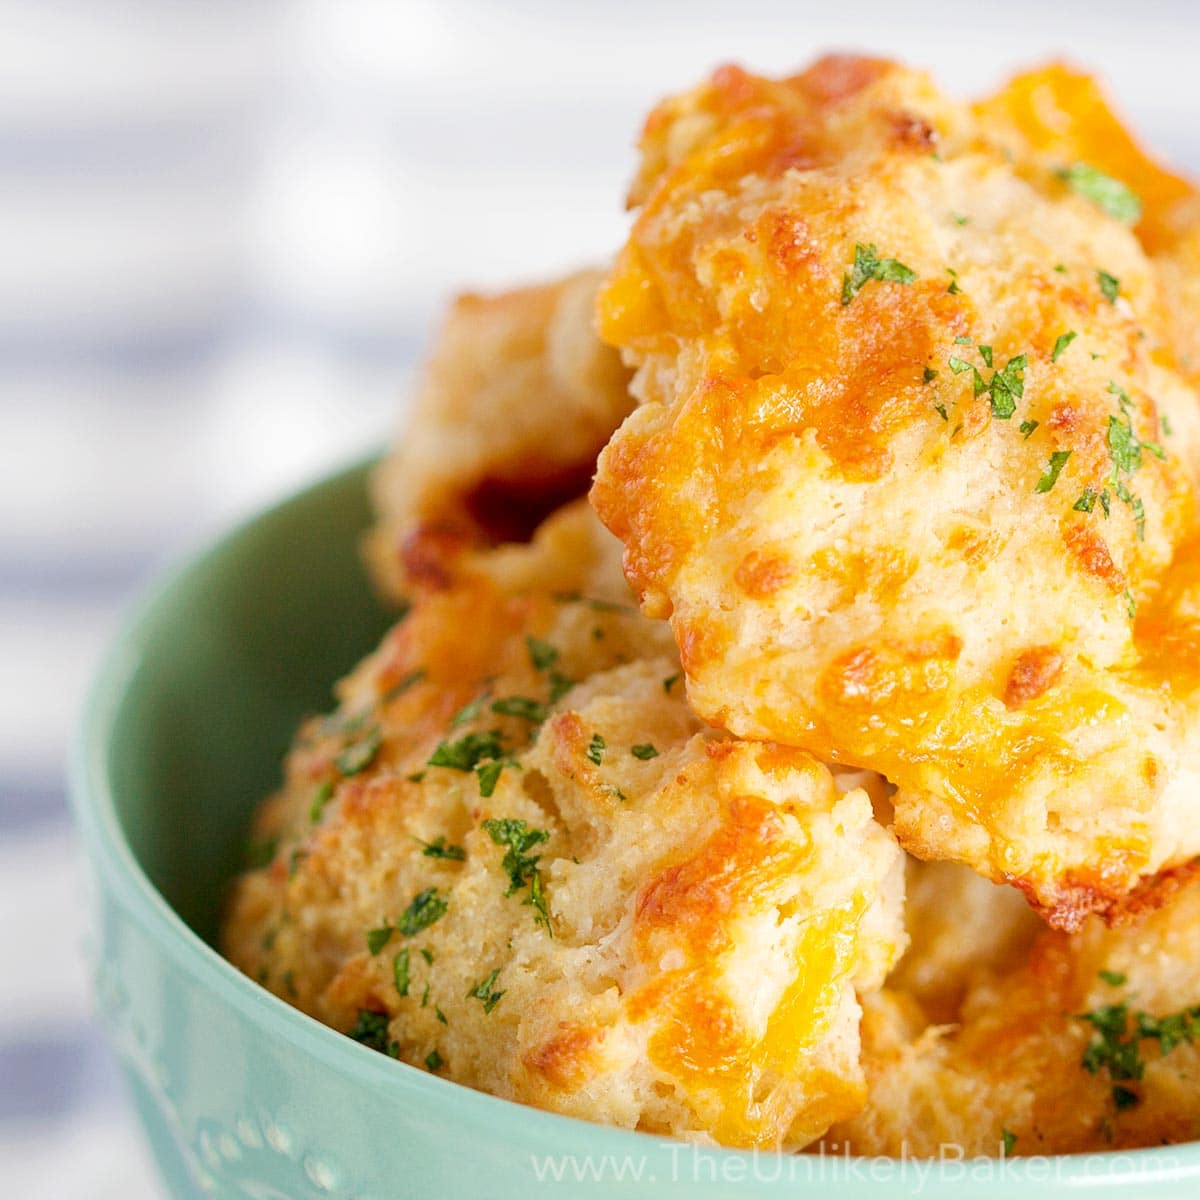 https://theunlikelybaker.com/wp-content/uploads/2016/05/Easy-Cheddar-Biscuits-FB.jpg